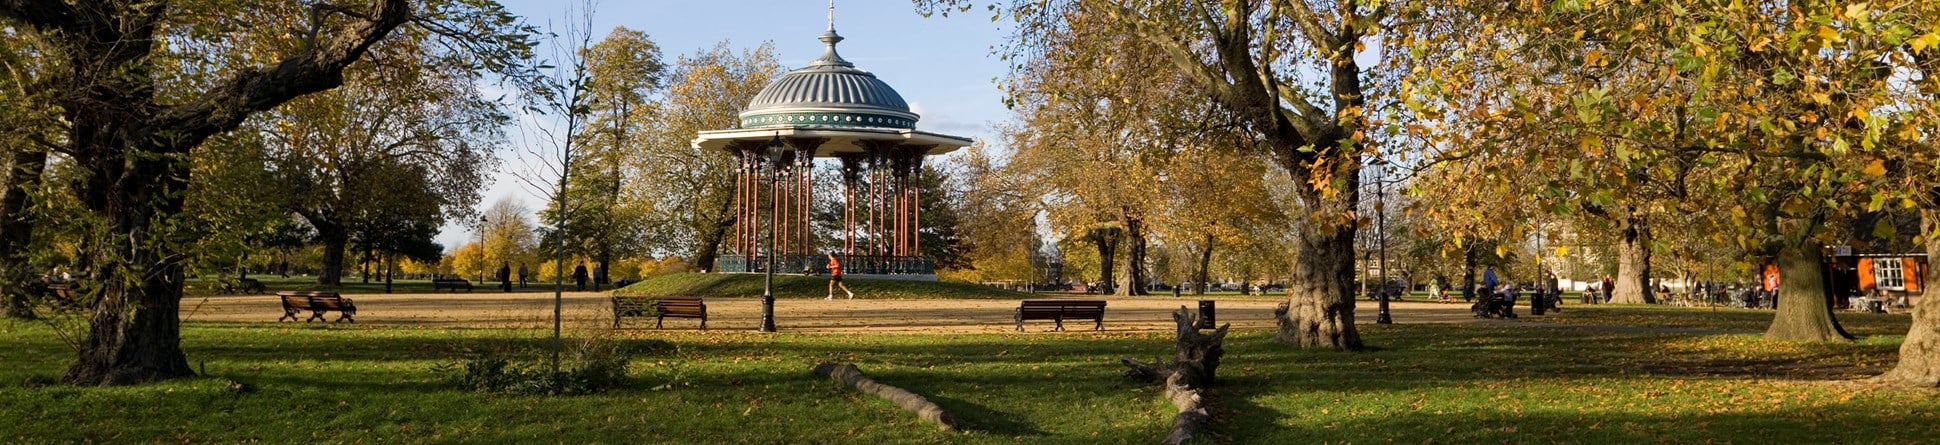 A jogger running past a bandstand at Clapham Common